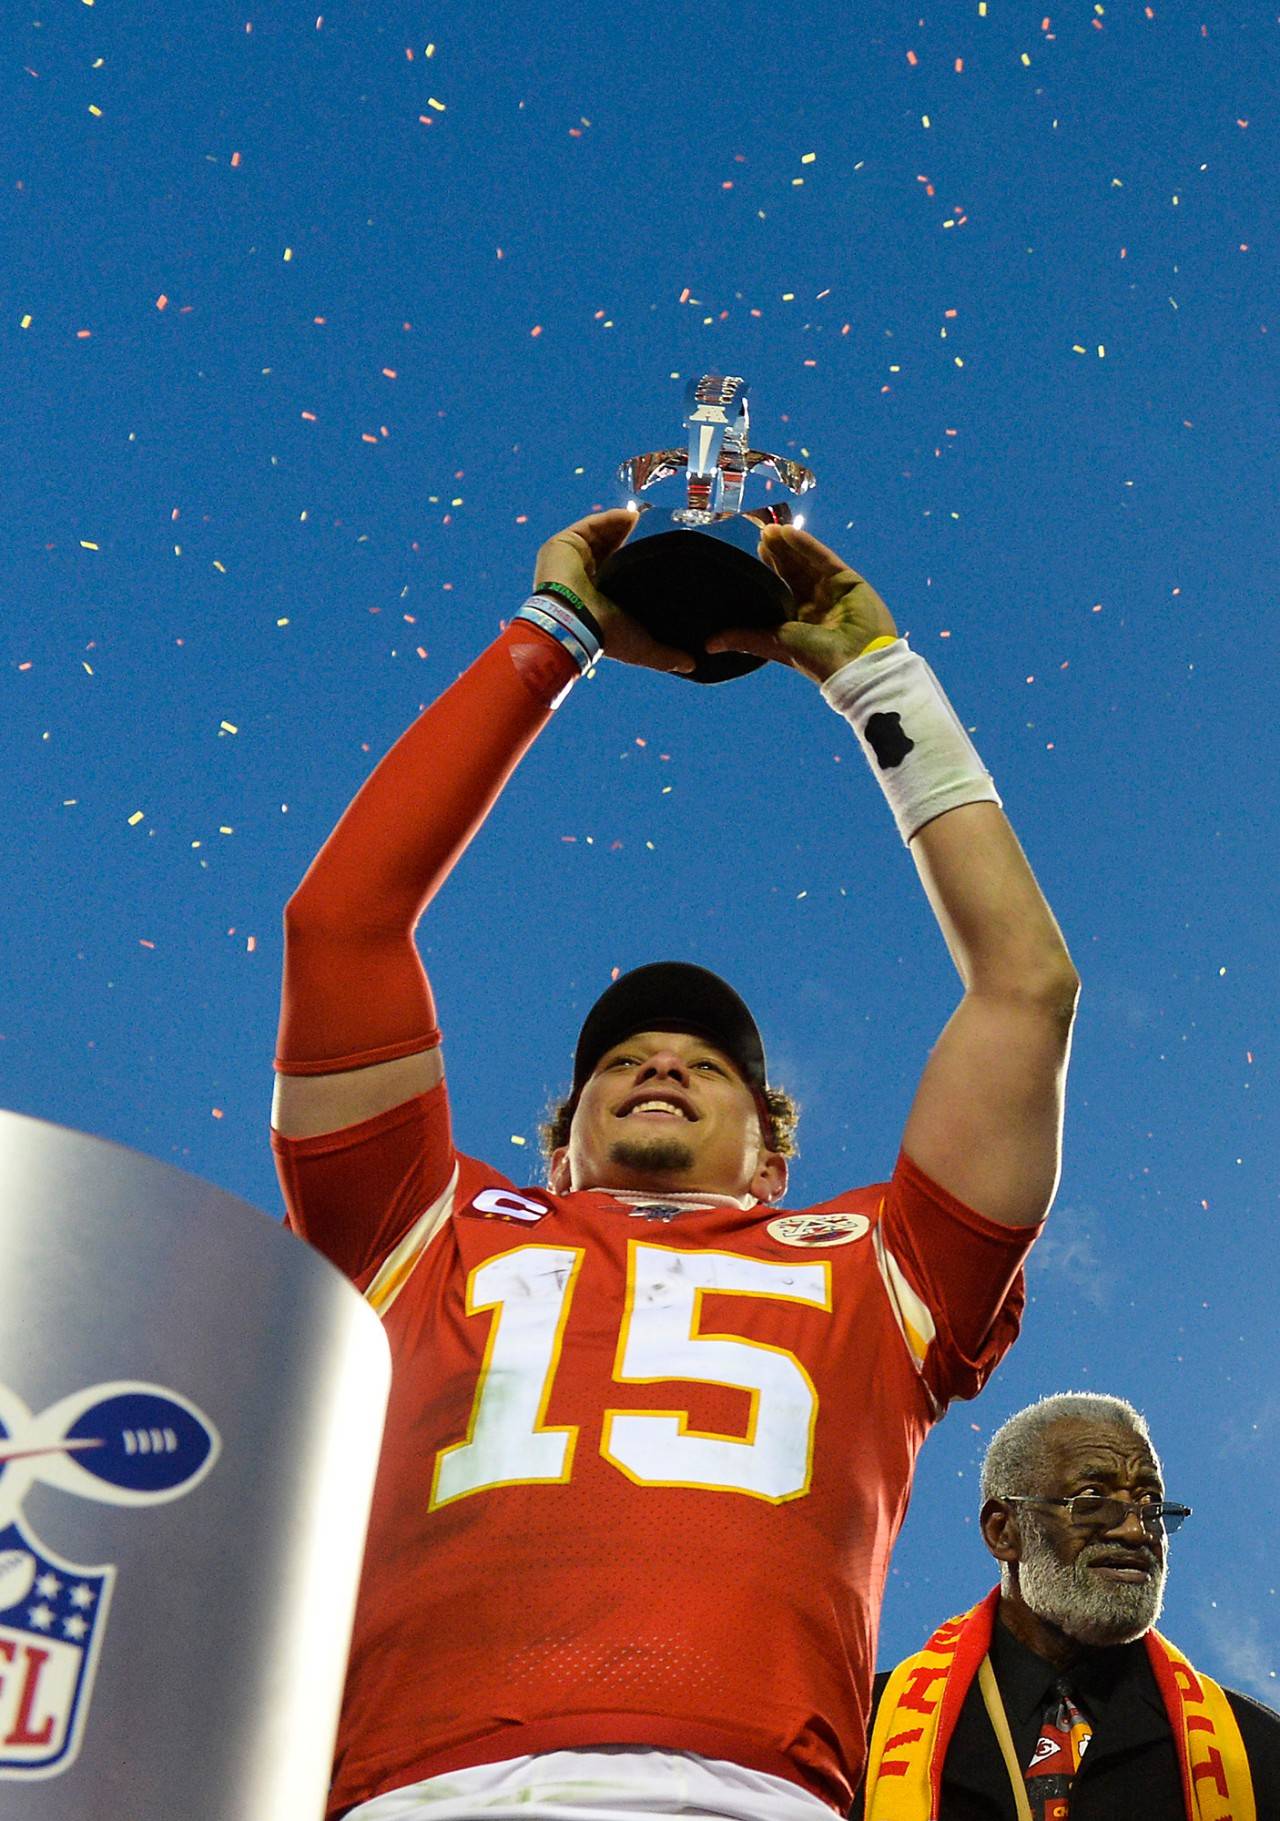 Kansas City Chiefs quarterback Patrick Mahomes hoists the Lamar Hunt AFC Championship trophy over his head after the Chiefs defeated the Tennessee Titans 35-24 to take the title and earn a trip to the Super Bowl after the AFC championship game on Sunday at Arrowhead Stadium in Kansas City, Missouri. (Jill Toyoshiba | Kansas City Star/TNS)